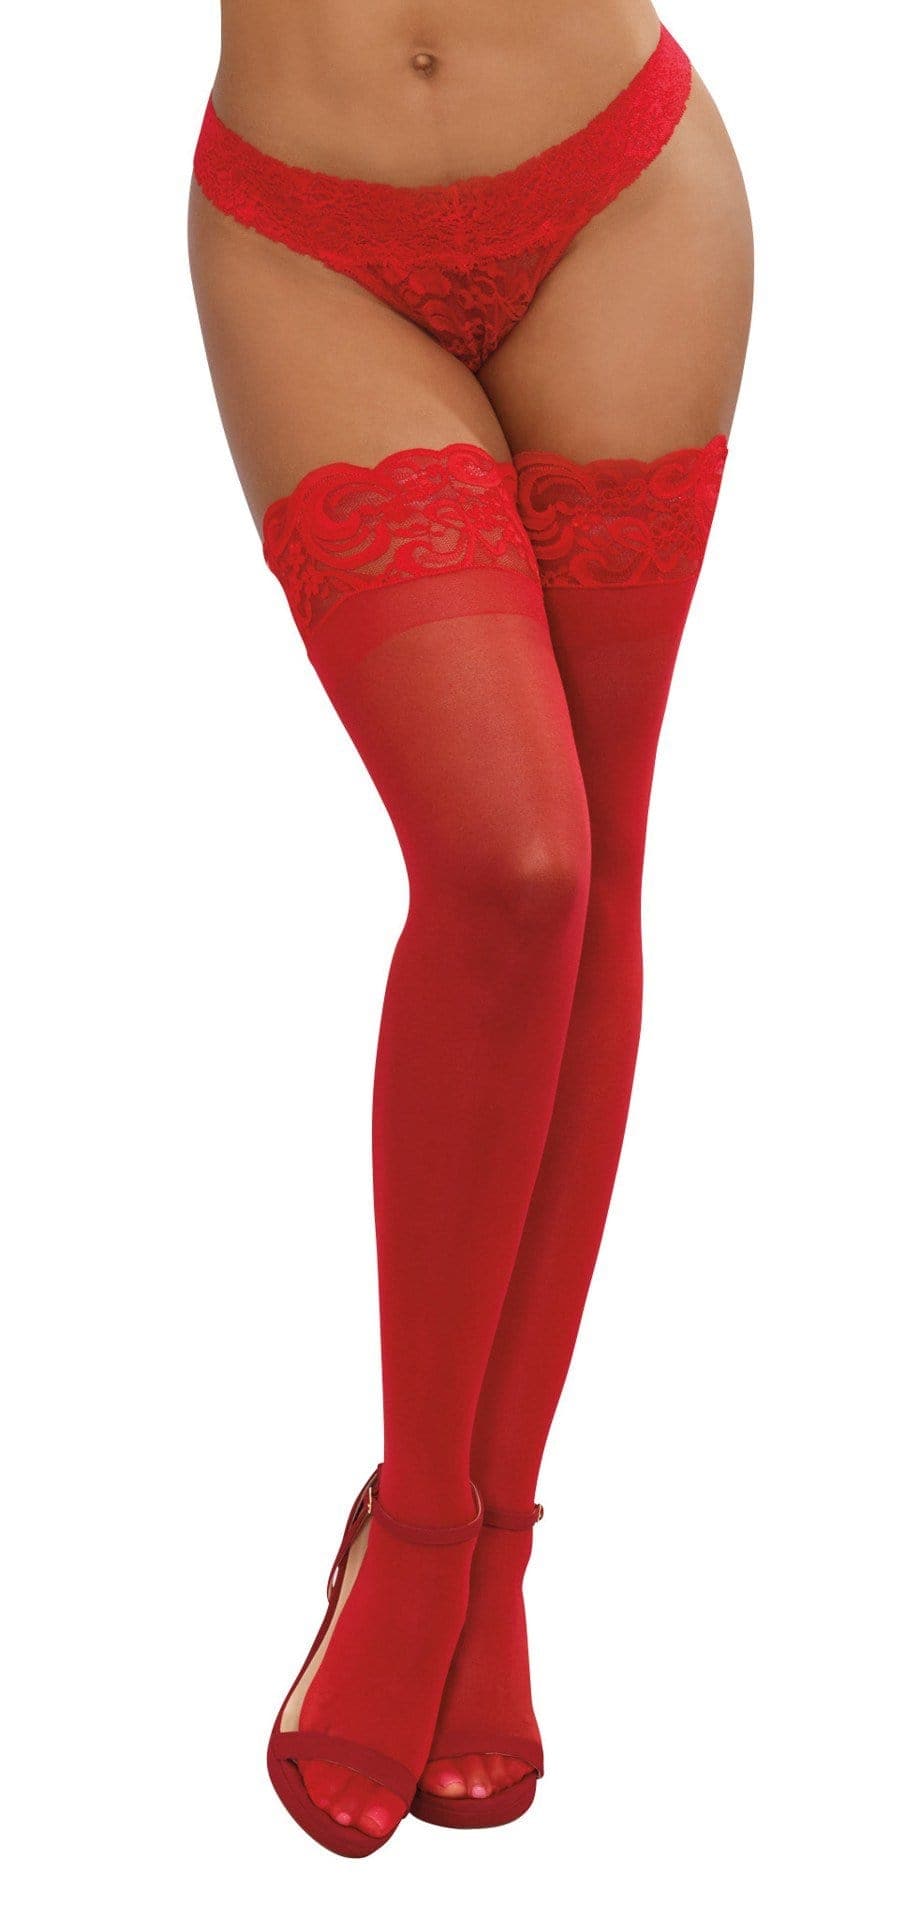 thigh high one size red